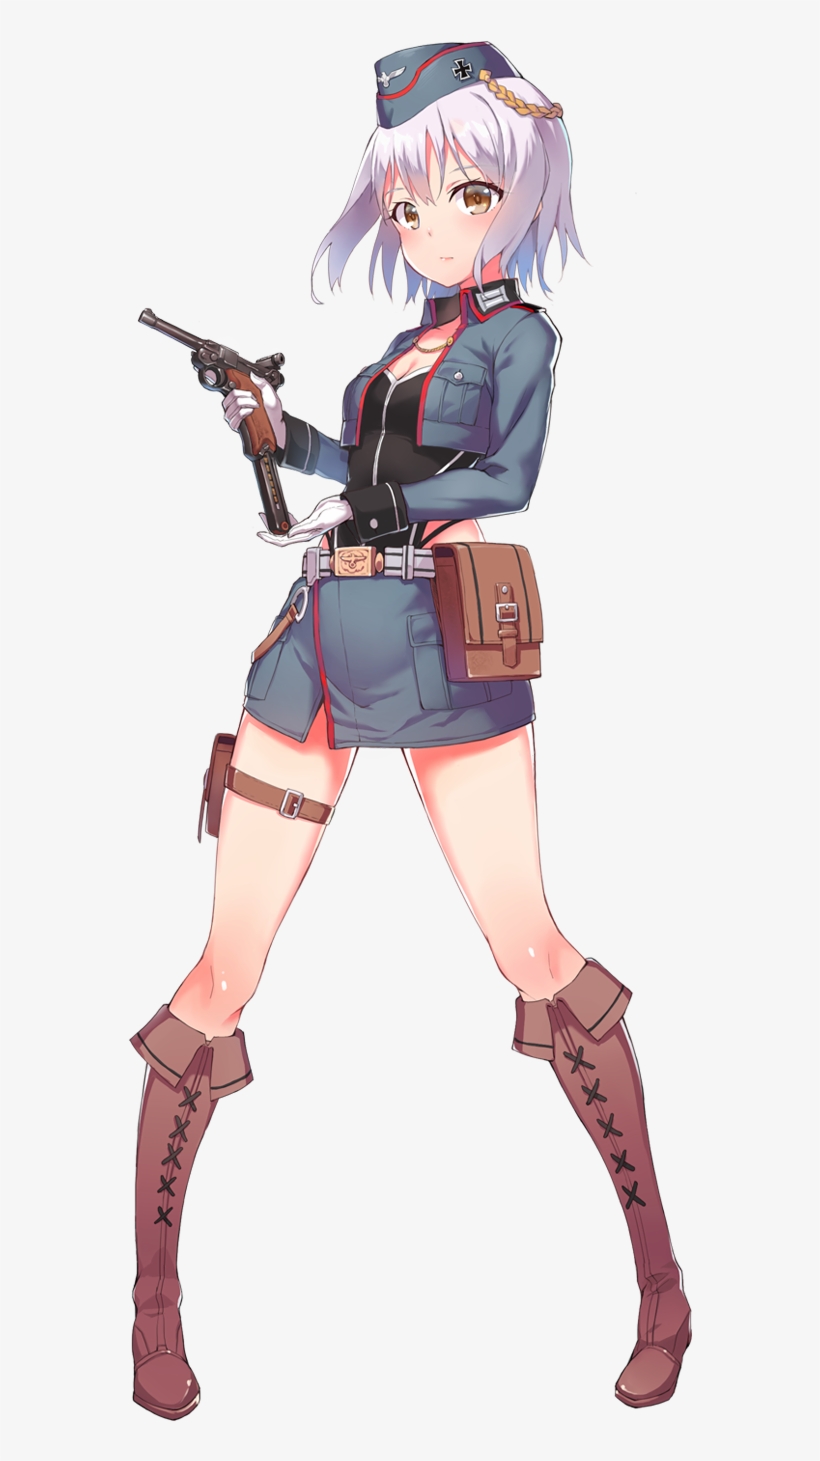 The Luger P08 Is A Semi-automatic Pistol Designed By - Girls Frontline P08, transparent png #1712519